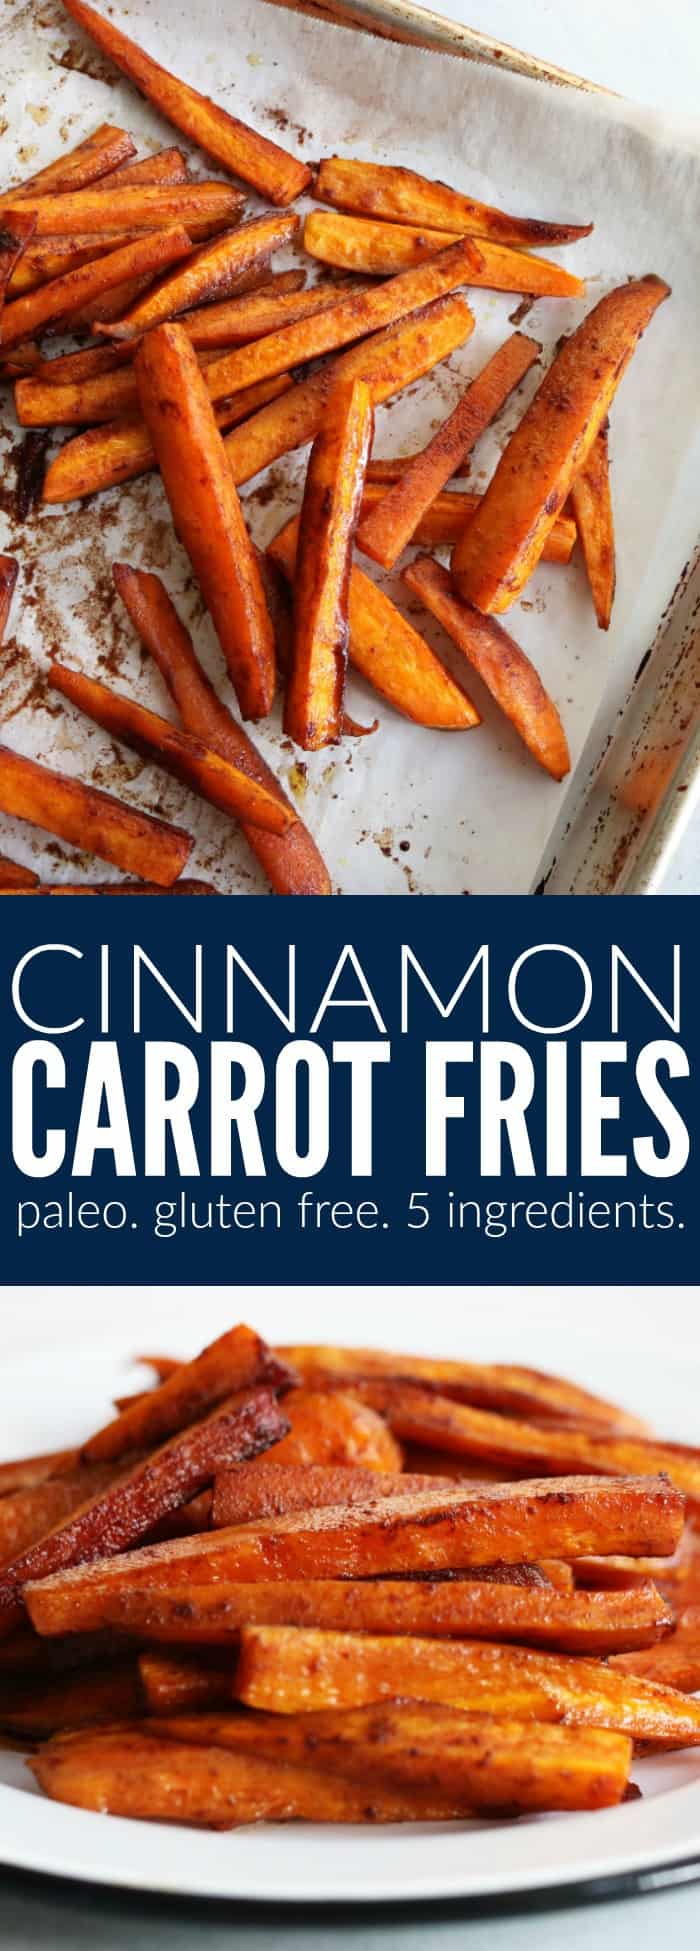 You'll love these Cinnamon Carrot Fries for a fun side for your weeknight meal or after school snack! They're perfect for fall, paleo, and gluten free! thetoastedpinenut.com #paleo #glutenfree #sidedish #recipe